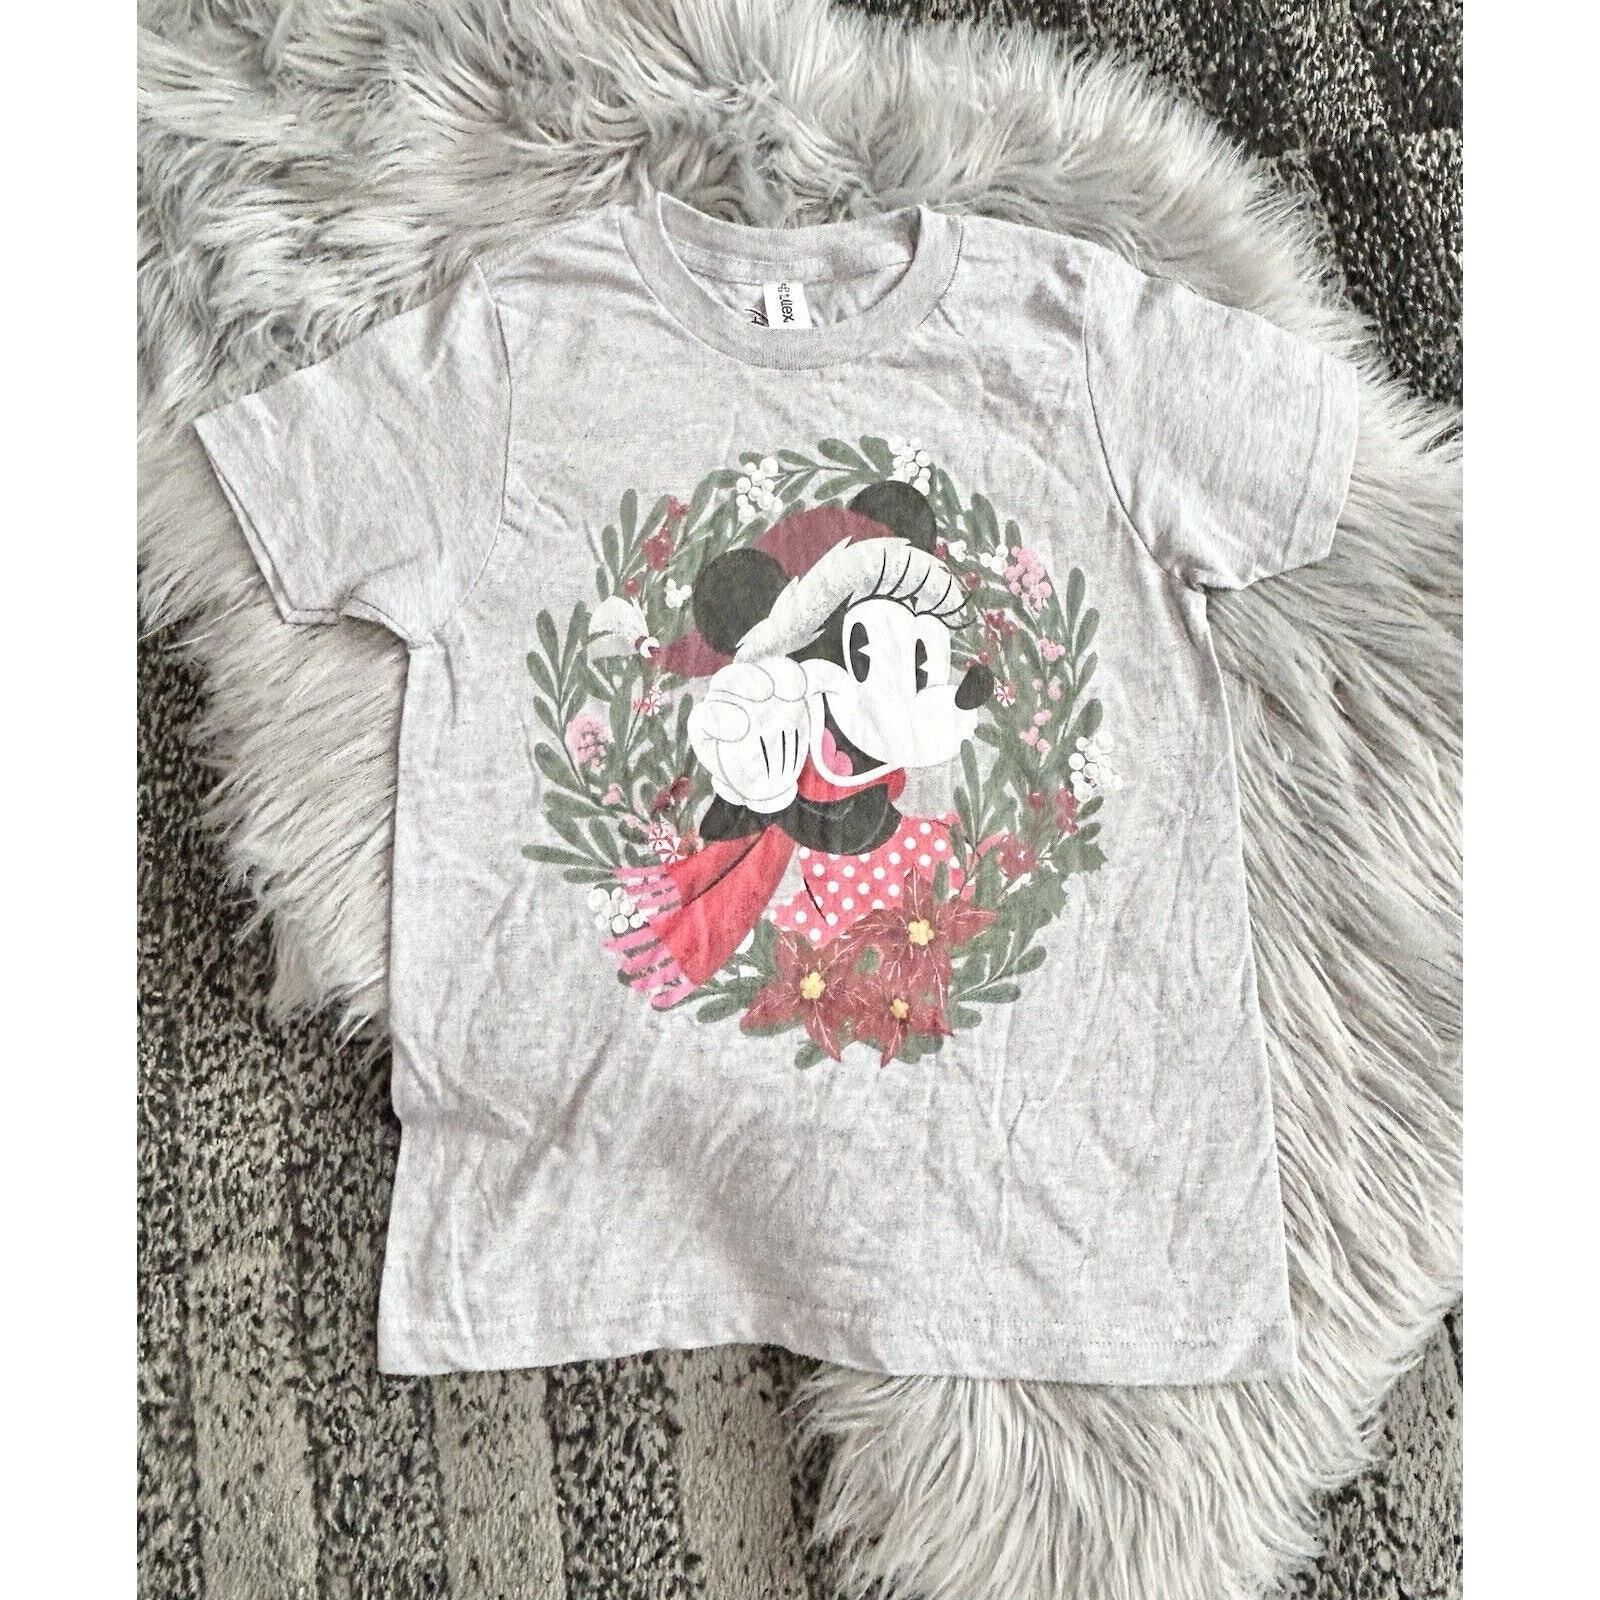 Disney Mickey Classic Wreath Christmas Portrait T-Shirt Size Youth Small (6/7T)